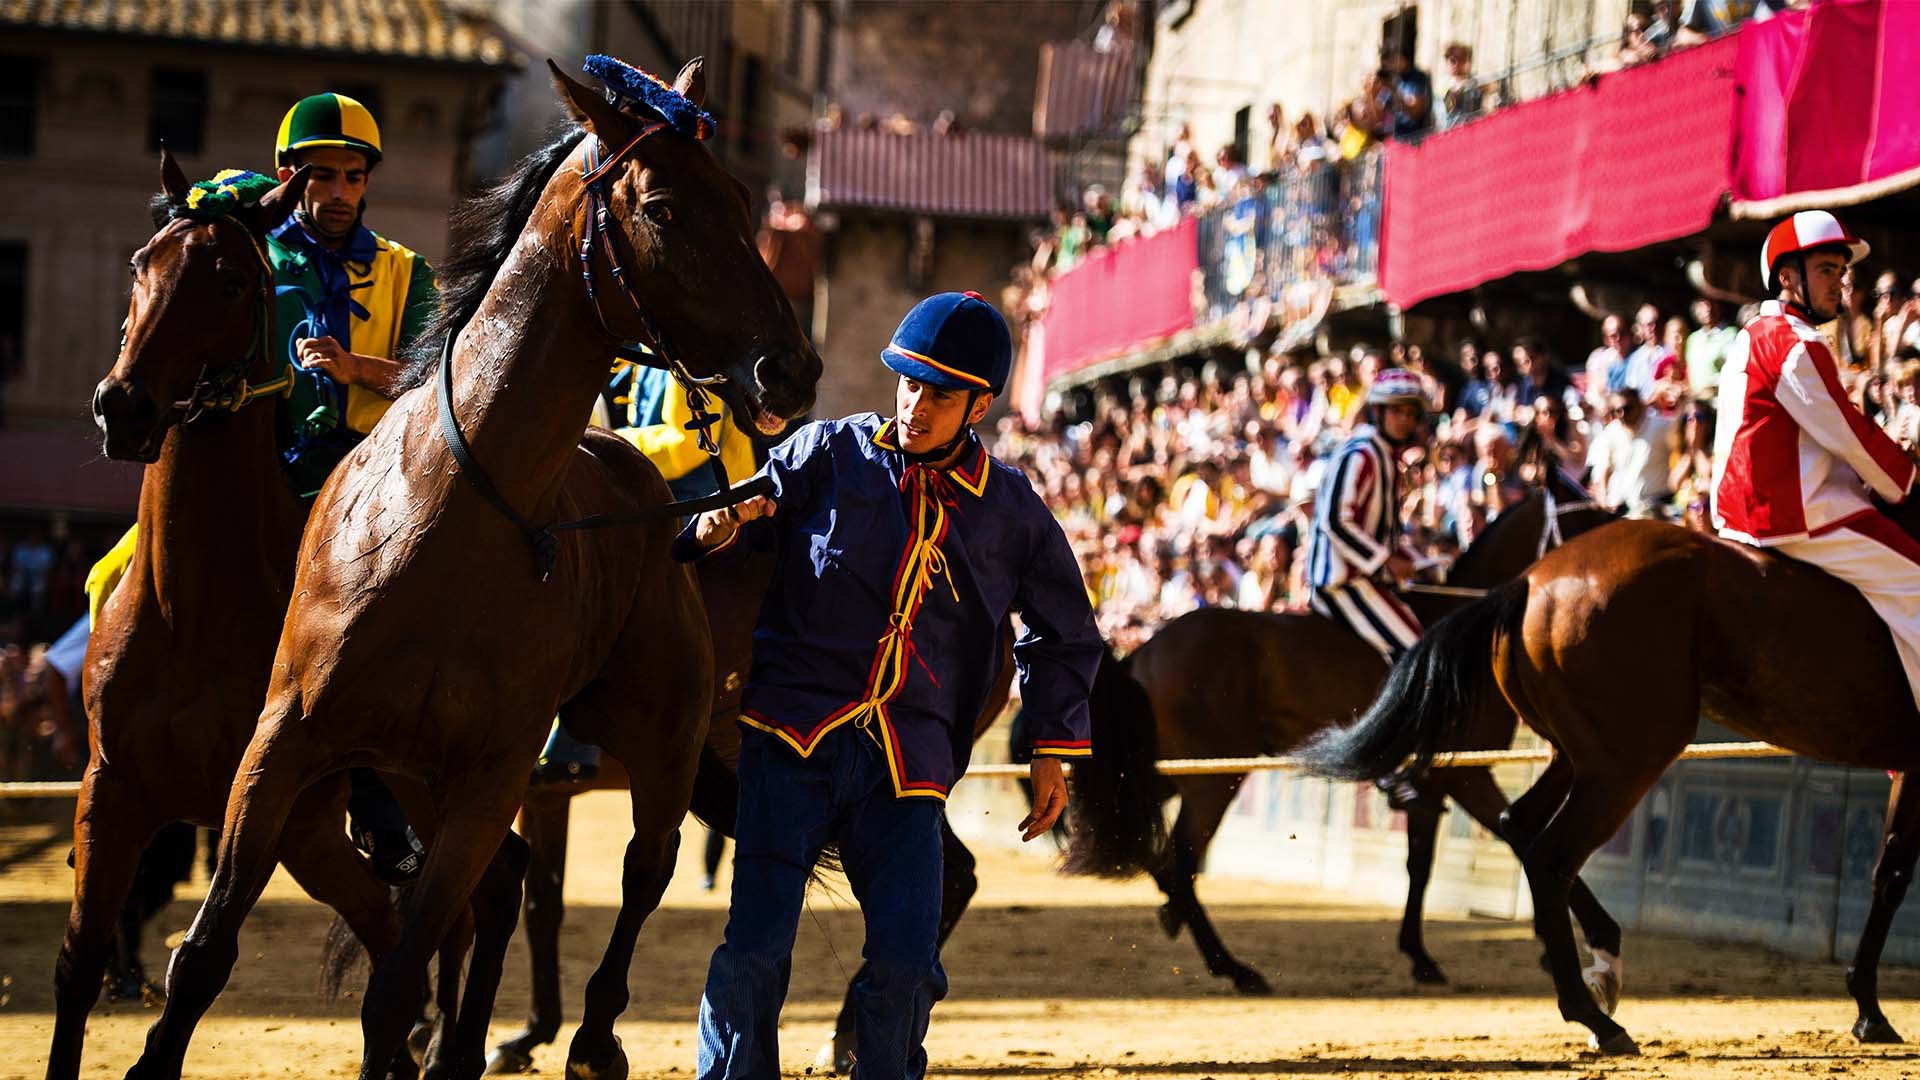 Siena's Il Palio horse race what you need to know Escapism Magazine